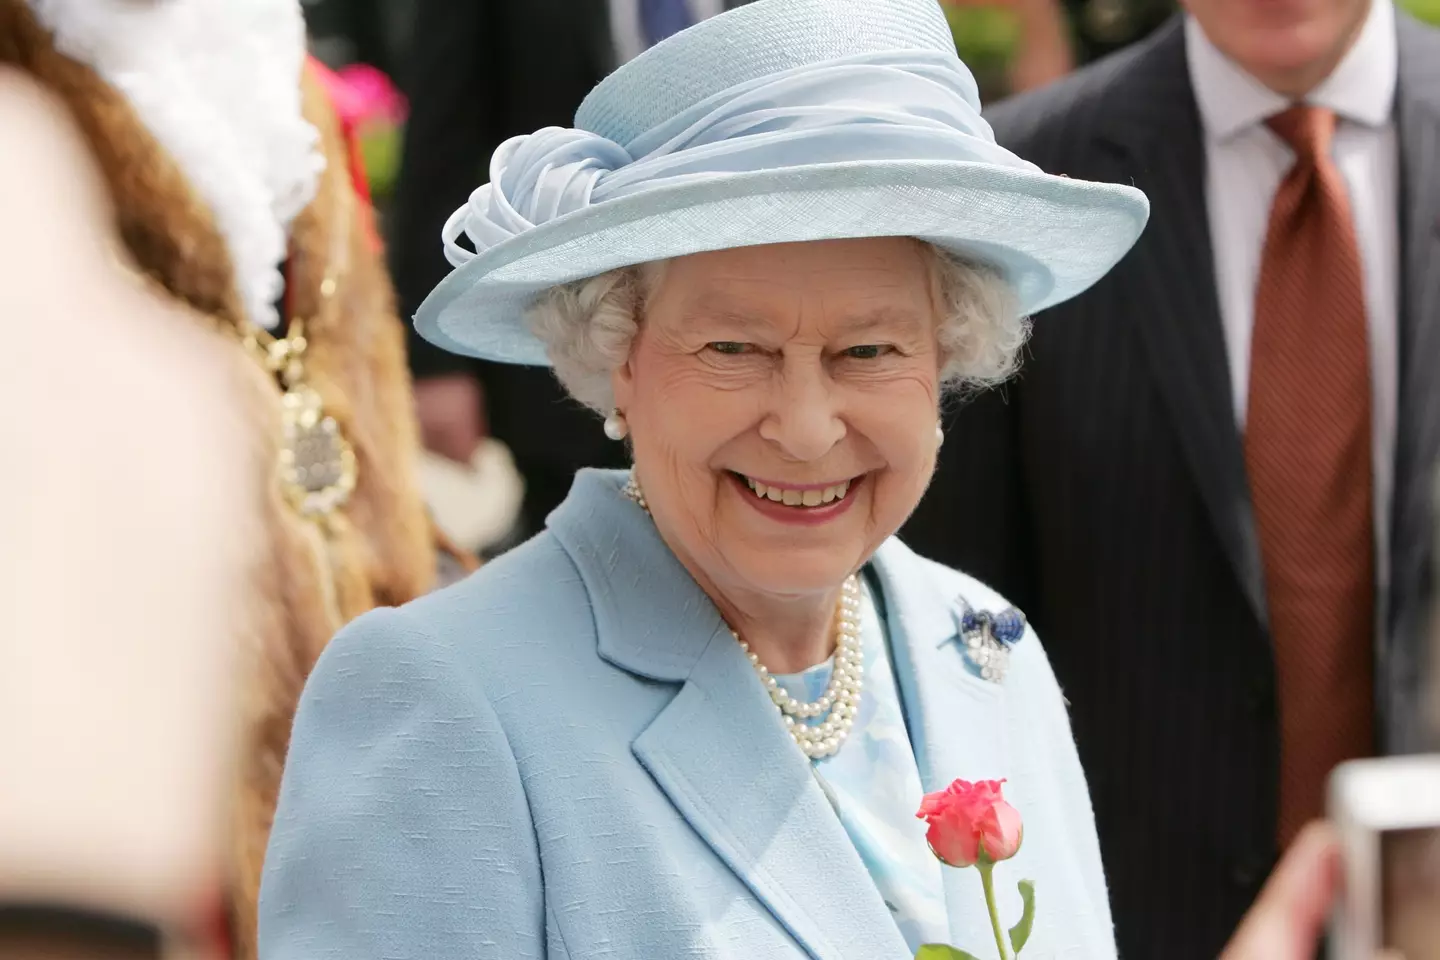 Former Royal protection officer Richard Griffiths has recalled one time the Queen played a joke on some hikers.